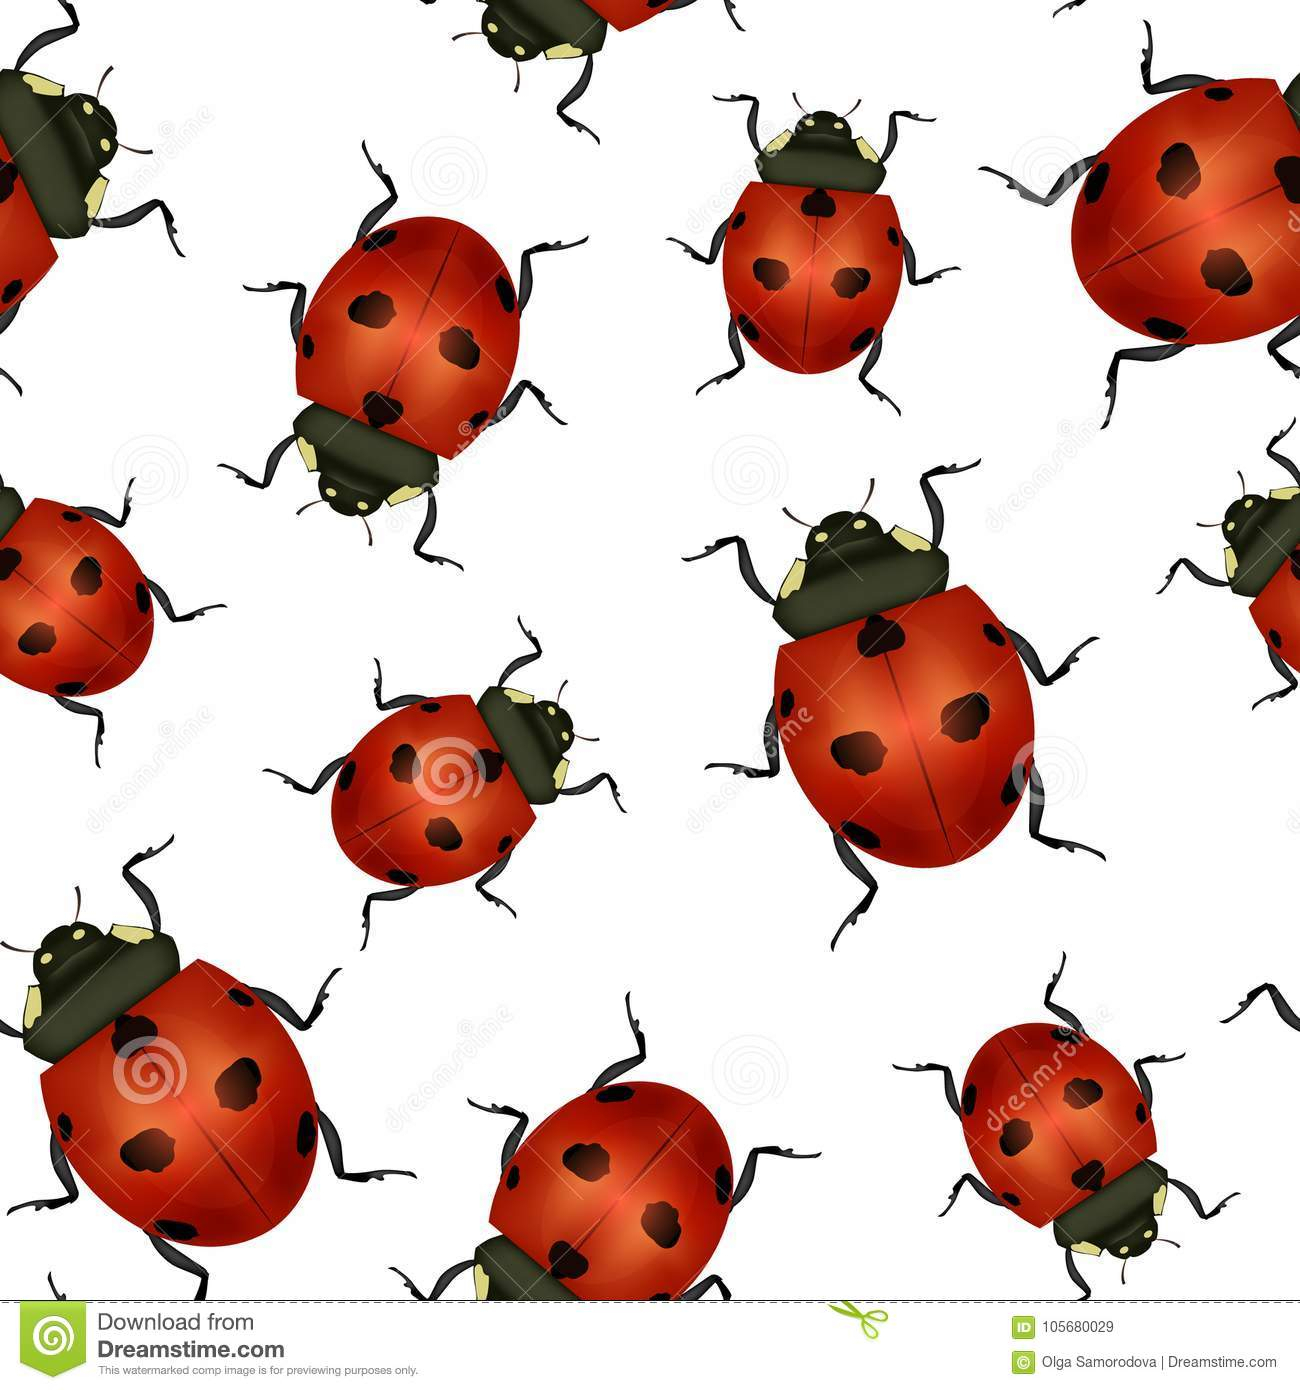 Realistic Detailed Insect Ladybug Seamless Pattern Intended For Blank Ladybug Template